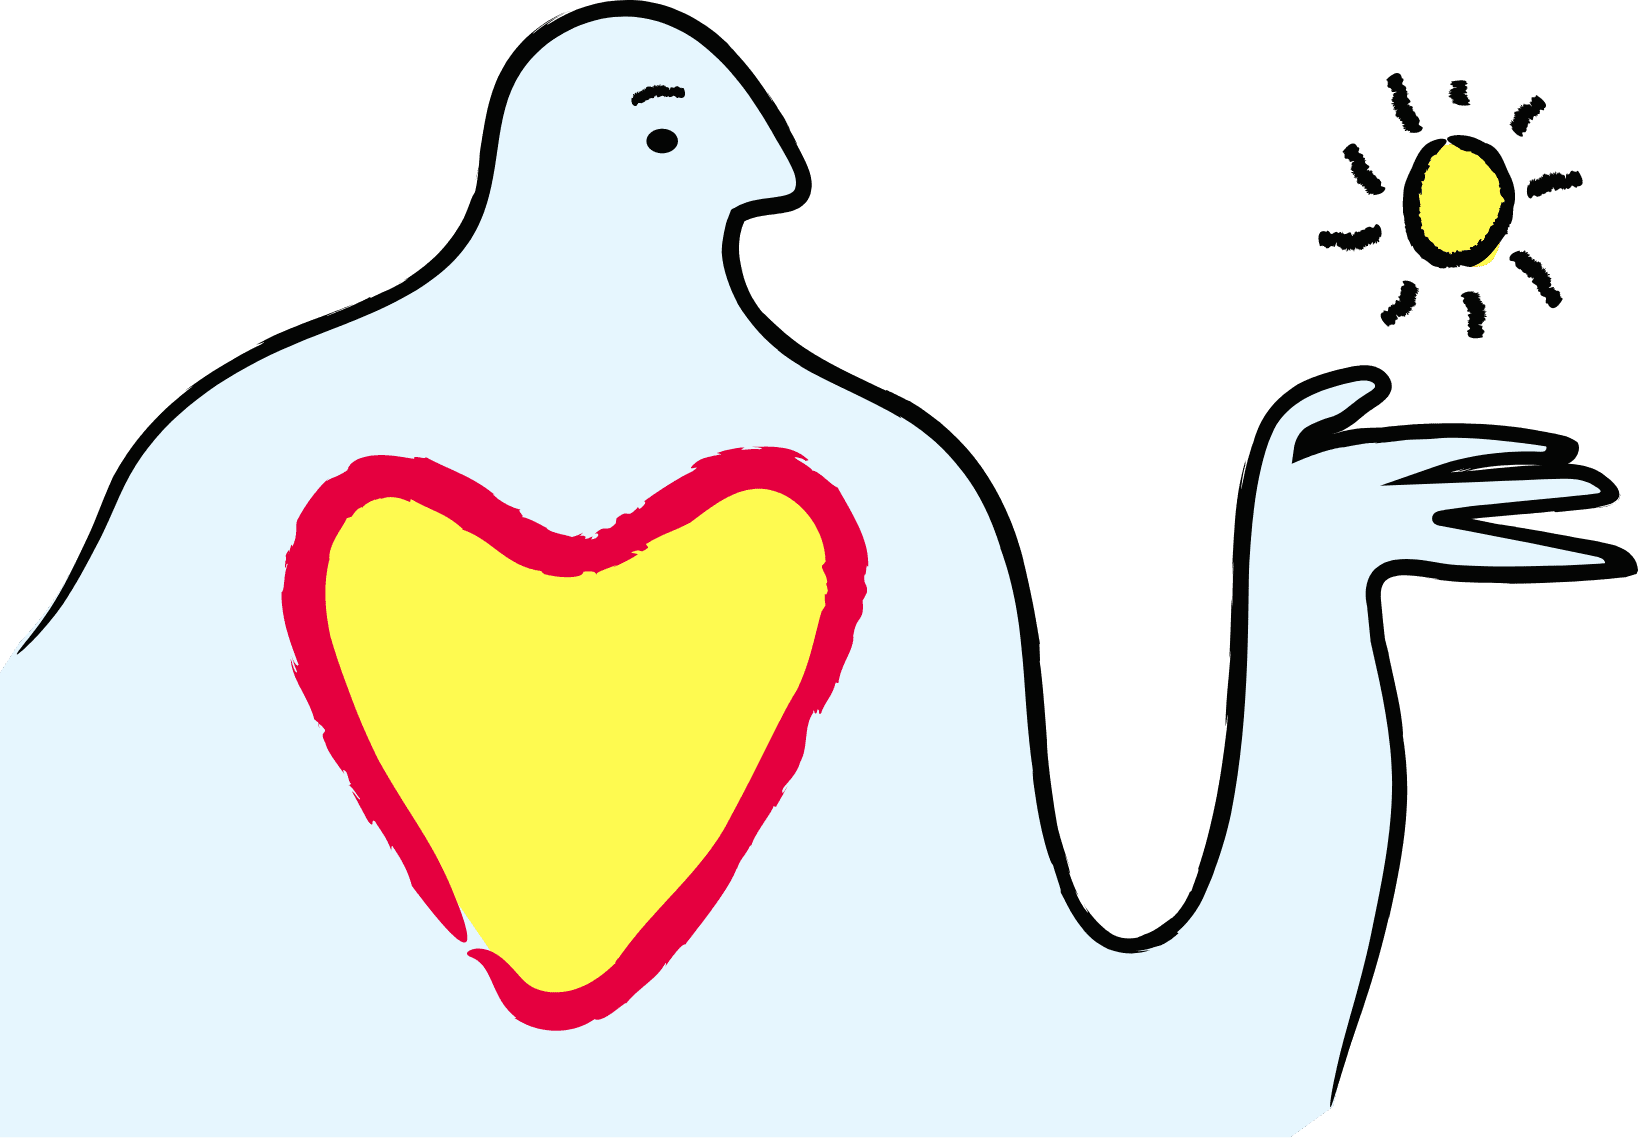 An illustration of a man with a heart on his chest